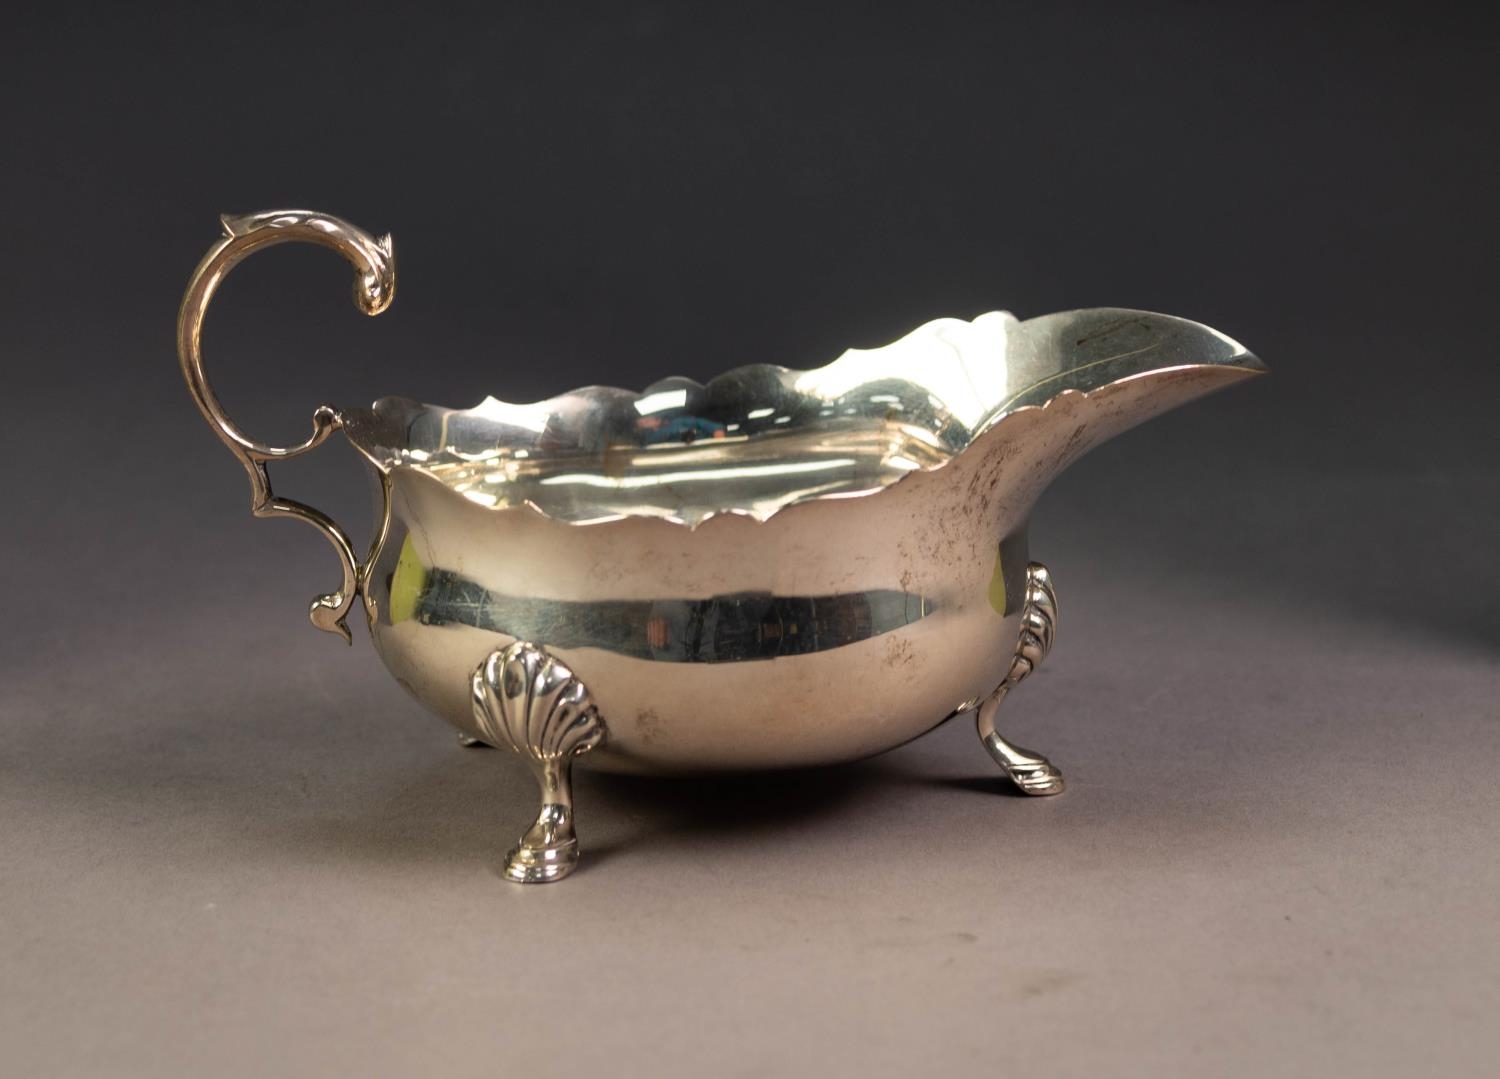 GEORGIAN STYLE SILVER SAUCE BOAT, with cyma edges, acanthus free scroll handle , on three shell